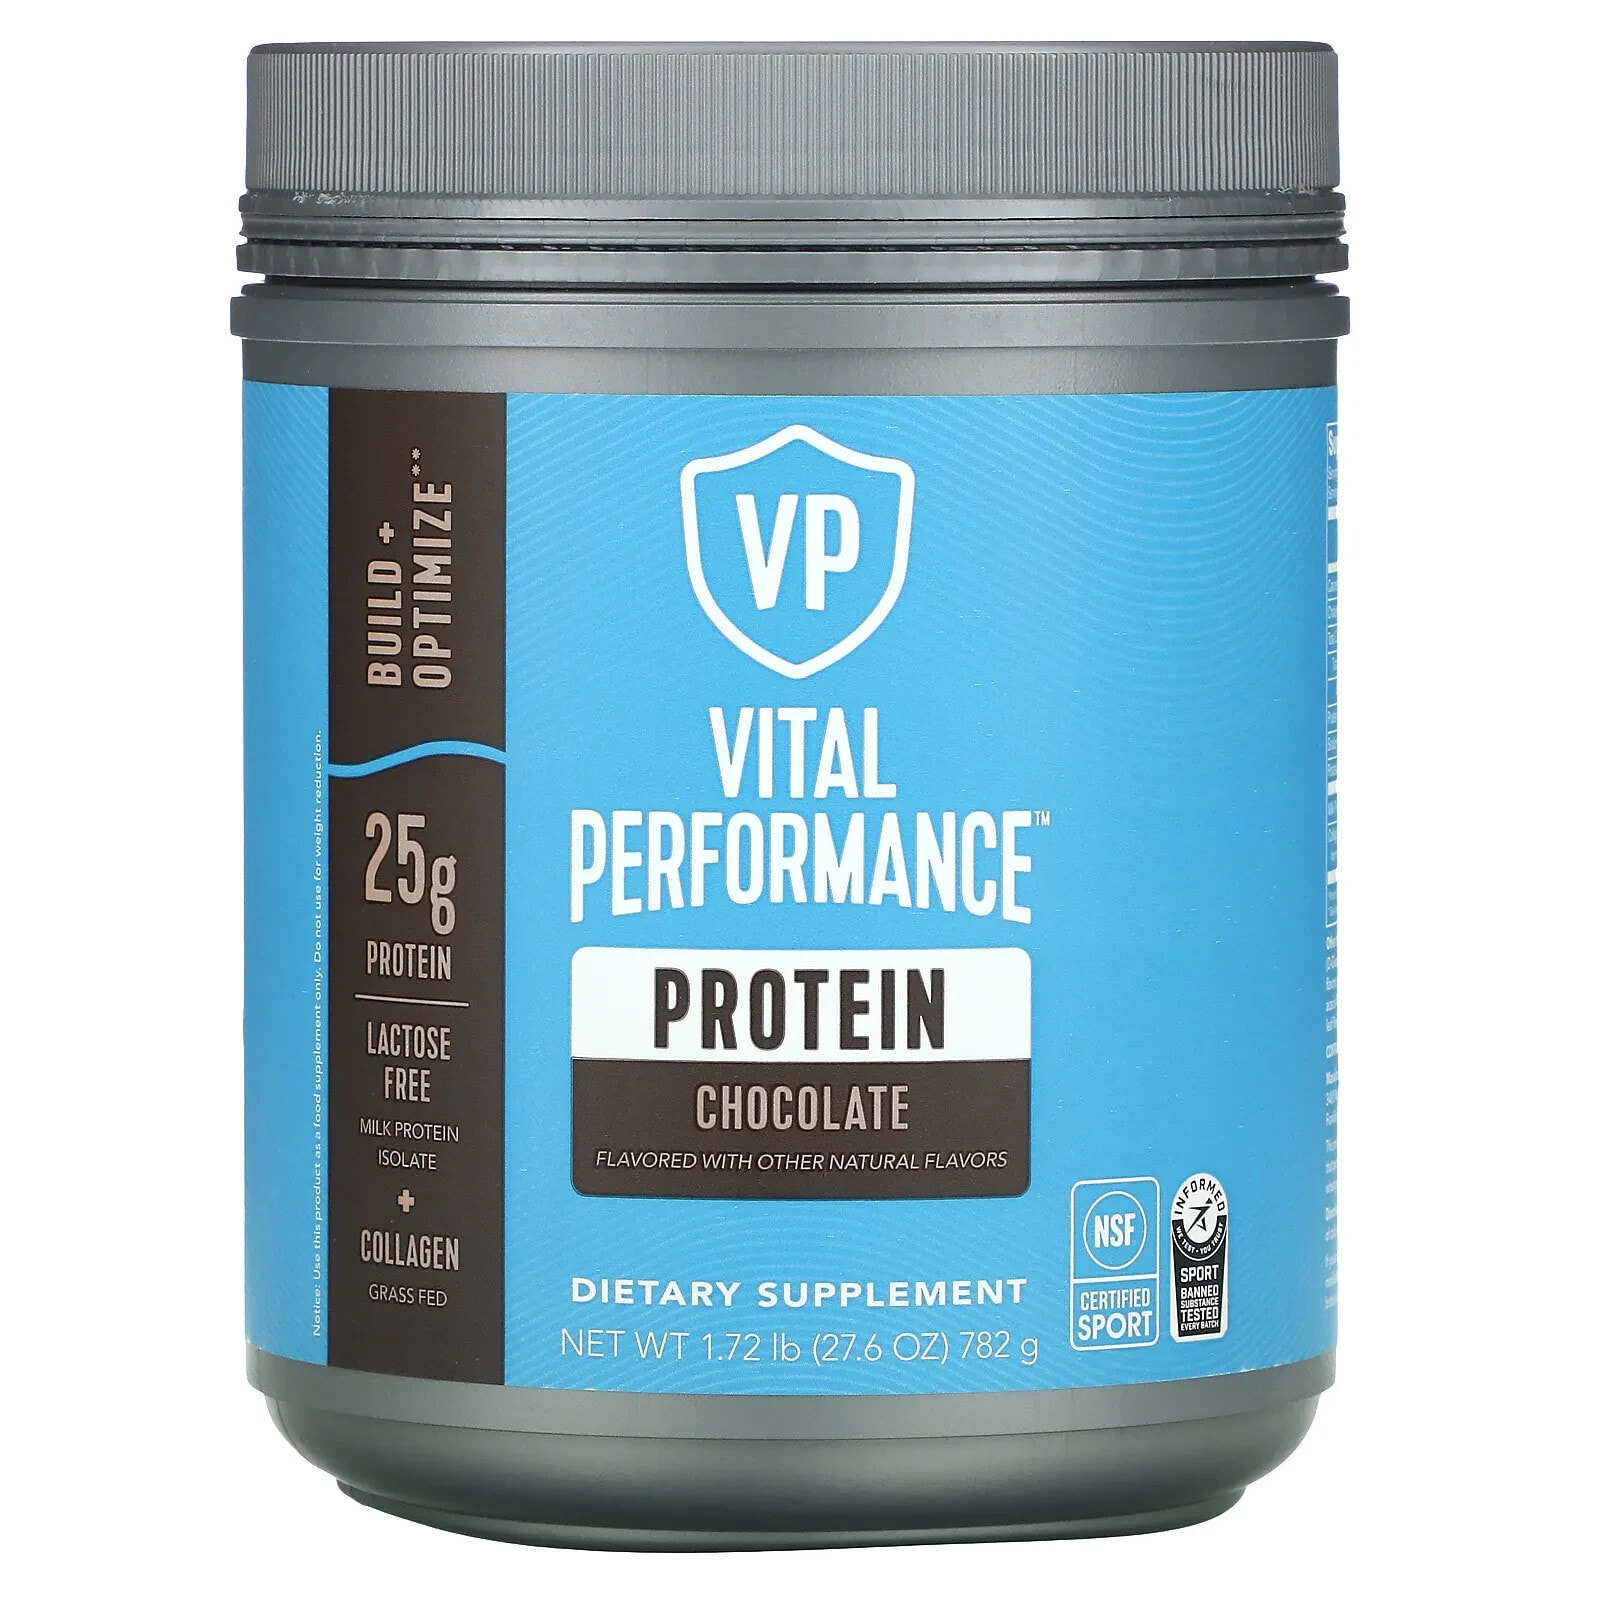 Vital Performance Protein, Cold Brew Coffee, 1.72 lb (782 g)